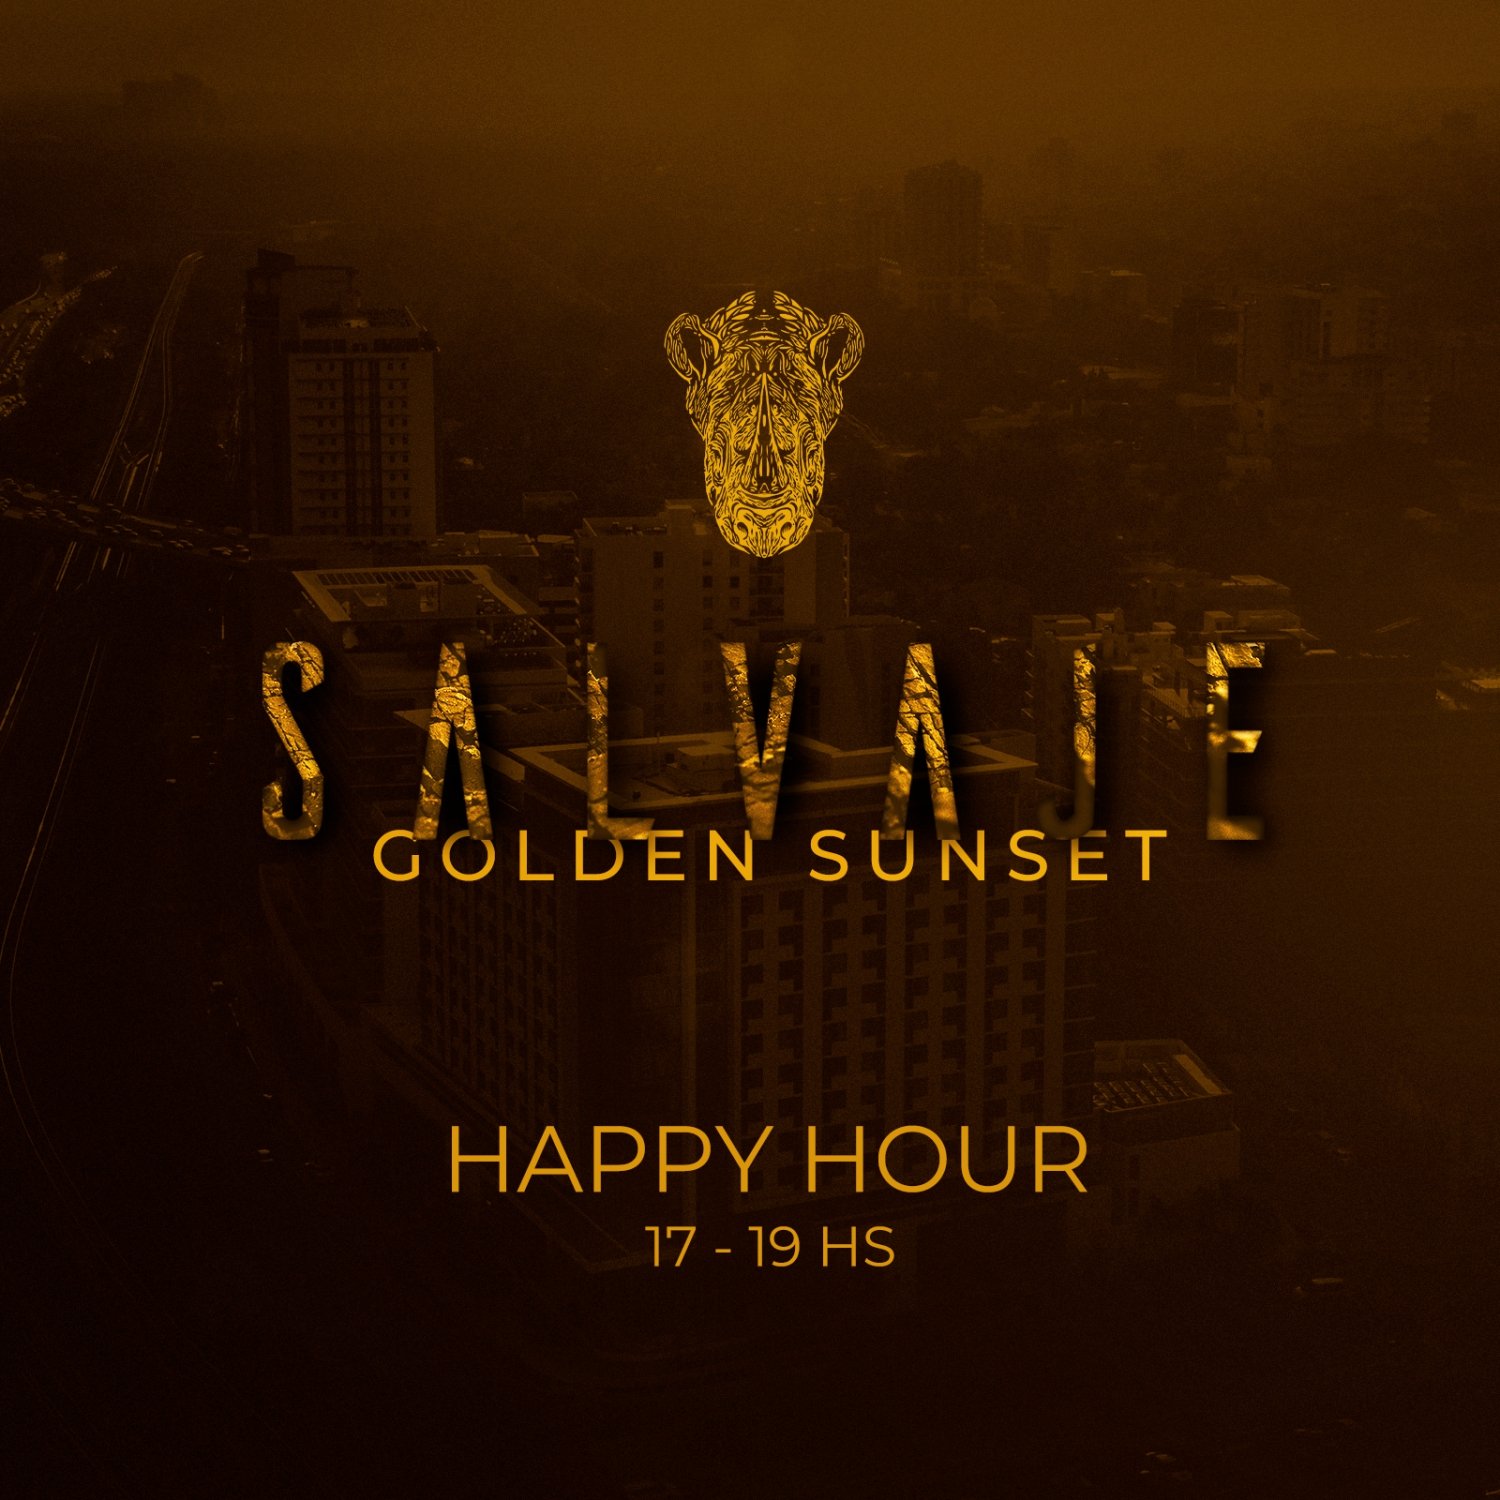 Golden Sunset with Happy Hour in Salvaje, Miami